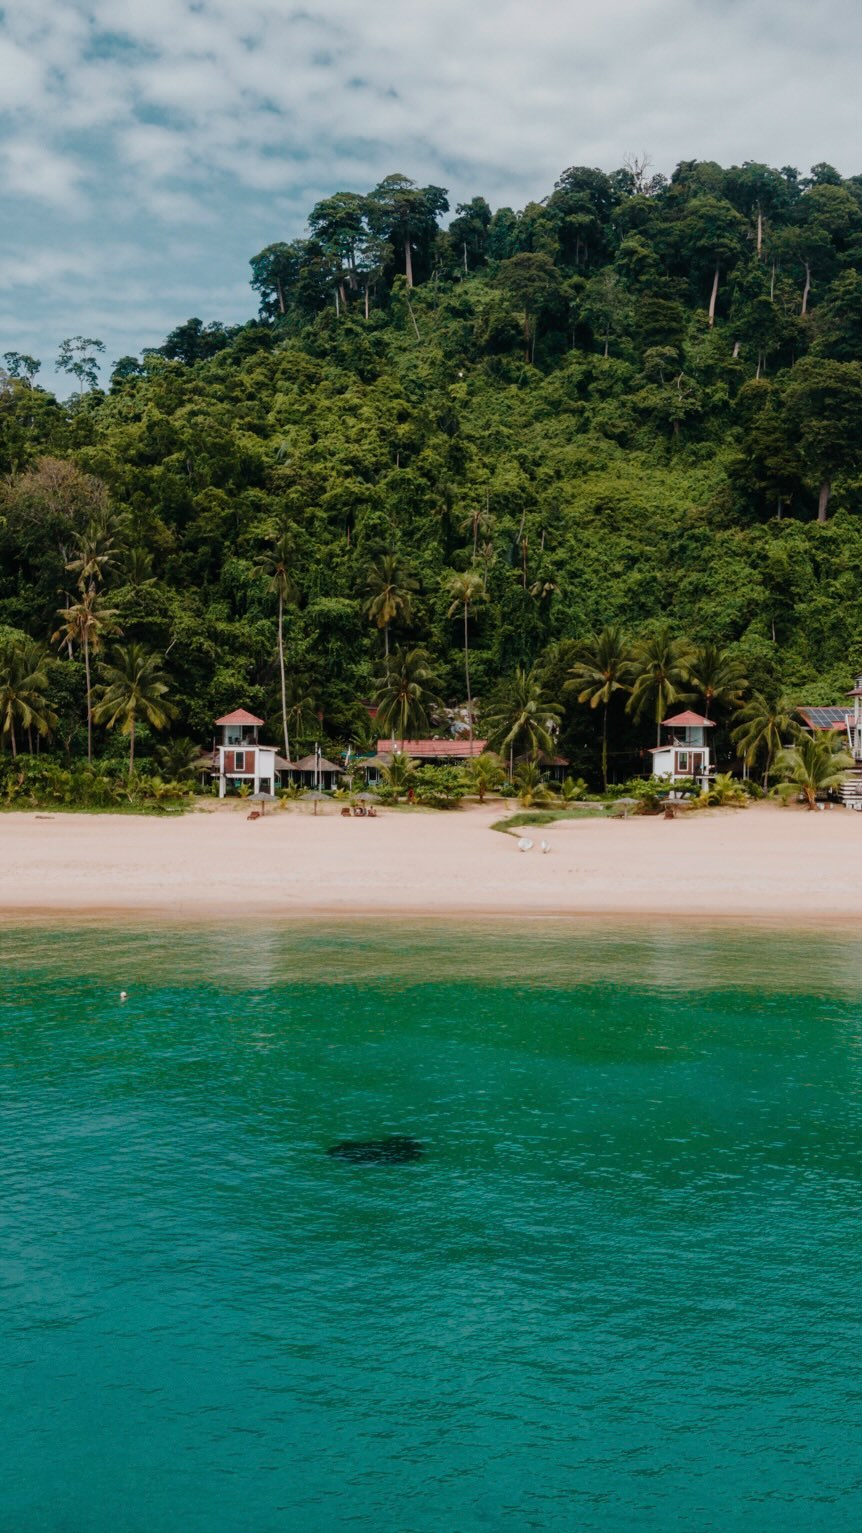 5-Day Adventure in Tioman Island: Snorkeling, Hiking, and Beaches